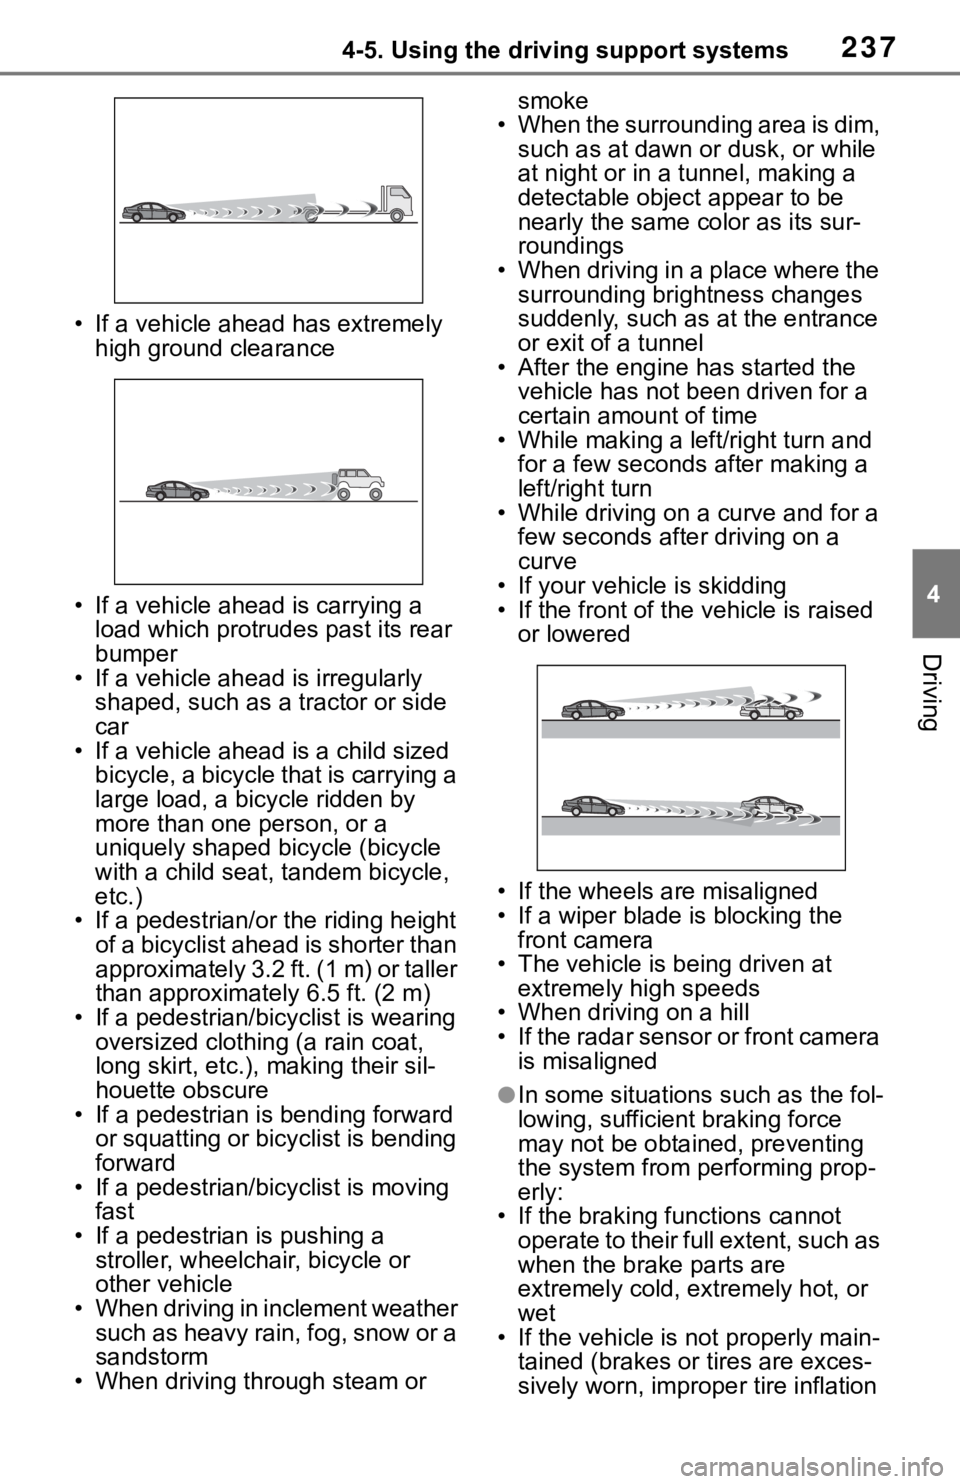 TOYOTA RAV4 2019   (in English) Owners Manual 2374-5. Using the driving support systems
4
Driving
• If a vehicle ahead has extremely high ground clearance
• If a vehicle ahead is carrying a  load which protrudes past its rear 
bumper
• If a